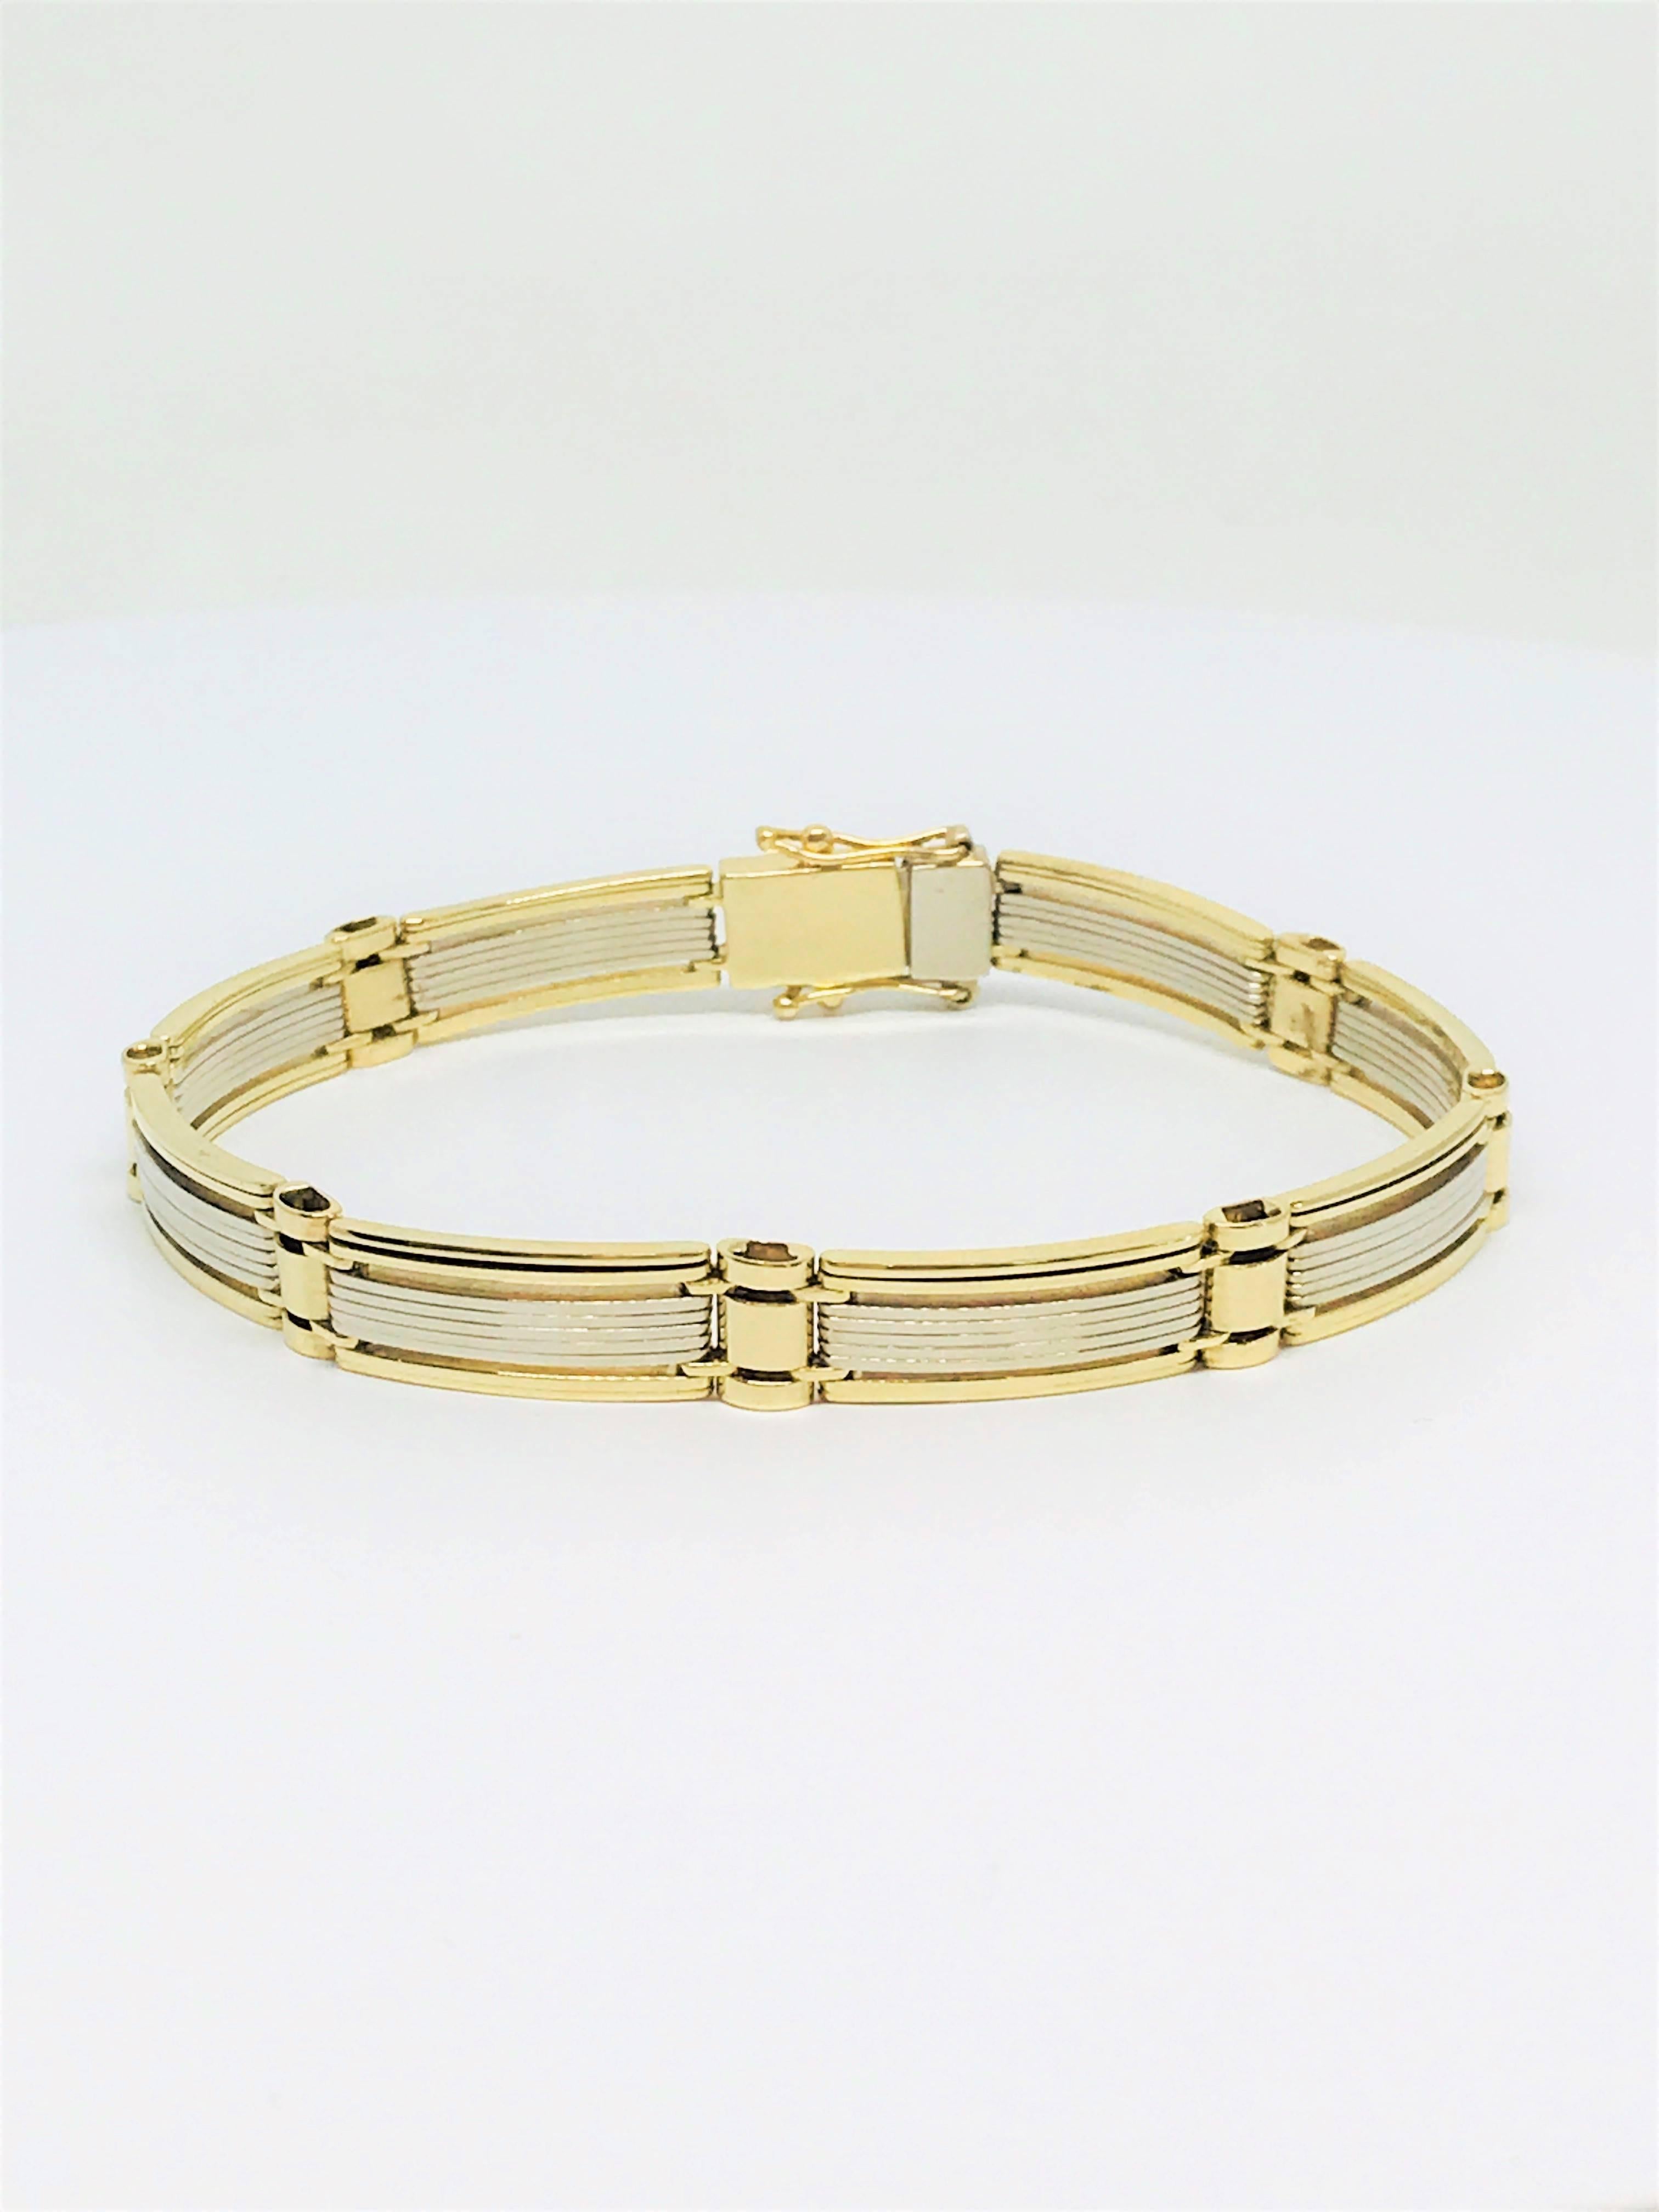 Solid link 14k Two Tone Gent's Flat Link Bracelet. Masculine and stylish. Solid links.
Length is 8.25 inches
Weight is 29.3 grams
Hallmarked - 14K JMD